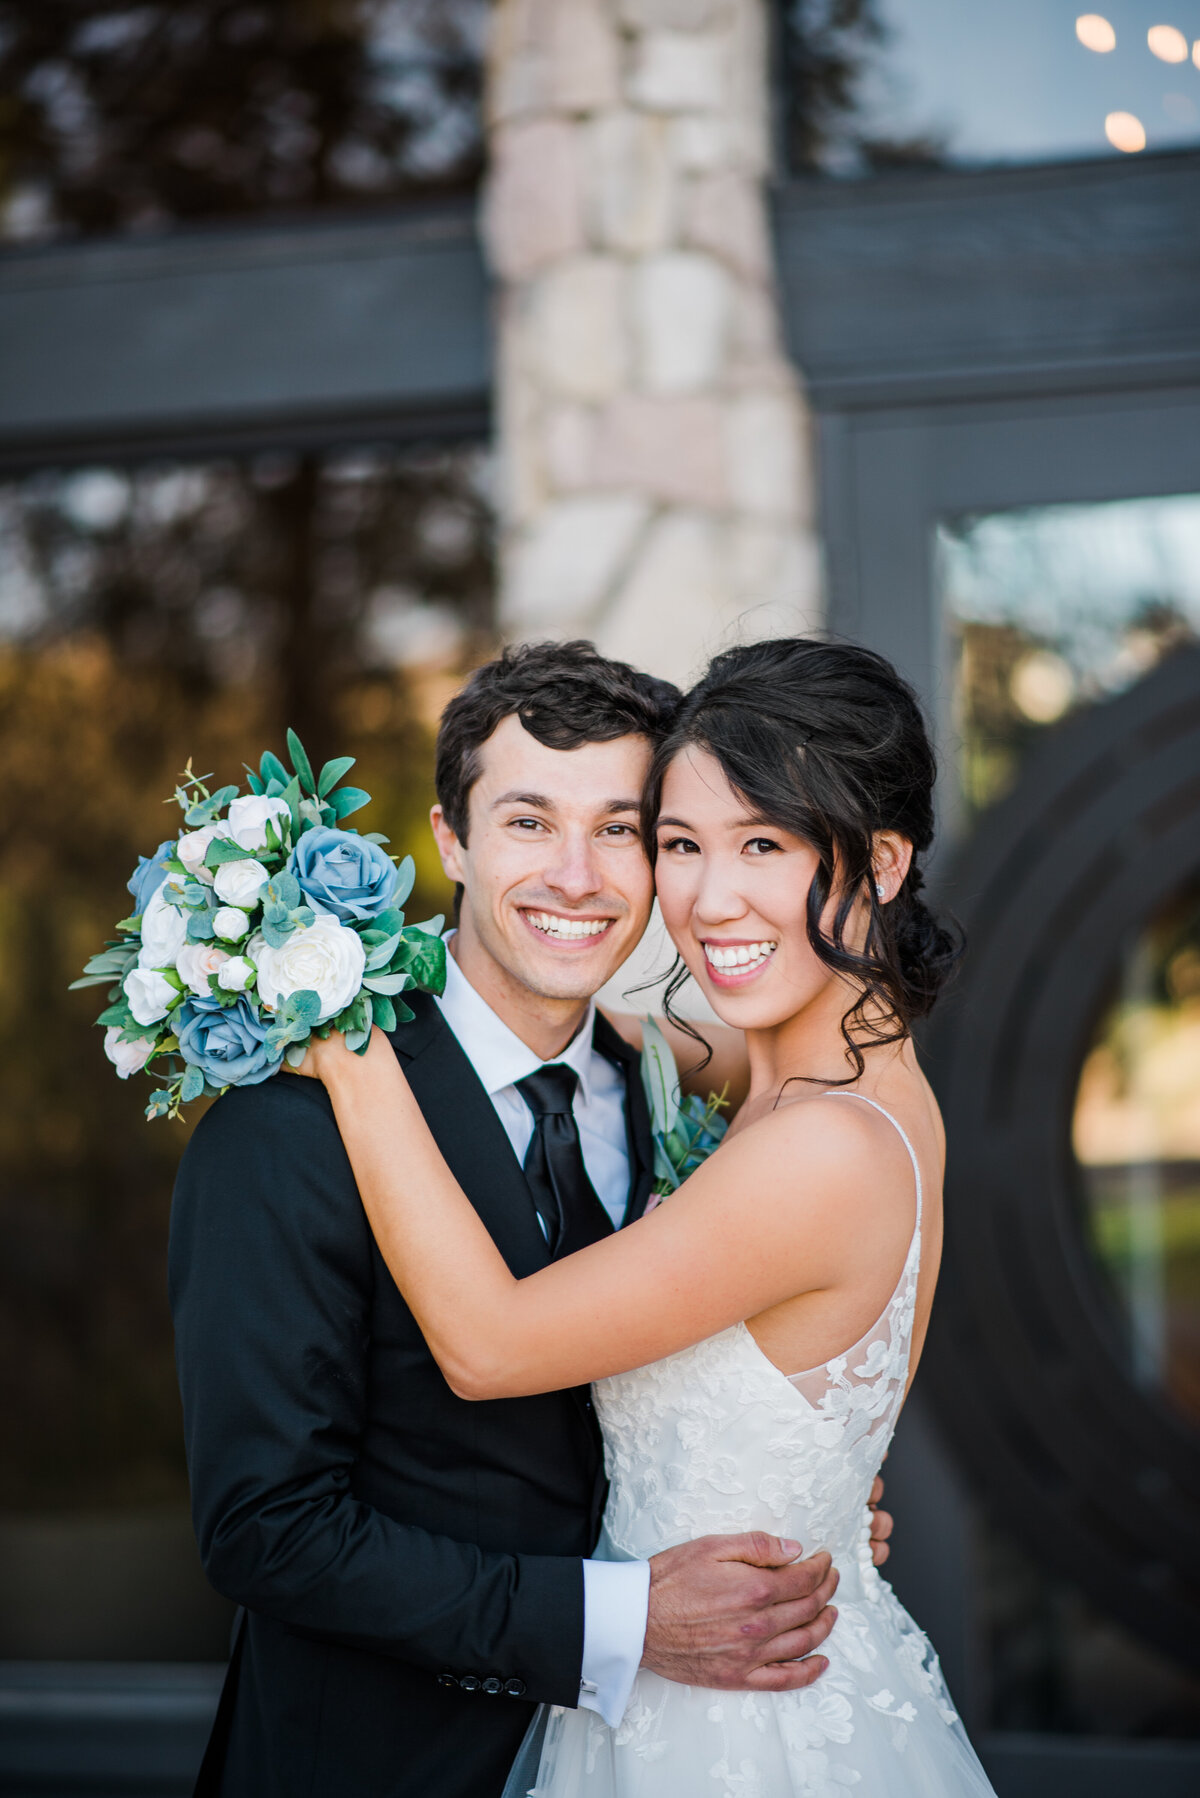 denver wedding photographer captures groom embracing his bride around the waist as she holds his shoulder with her blue and green wedding flowers in one hand at their outdoor colorado wedding